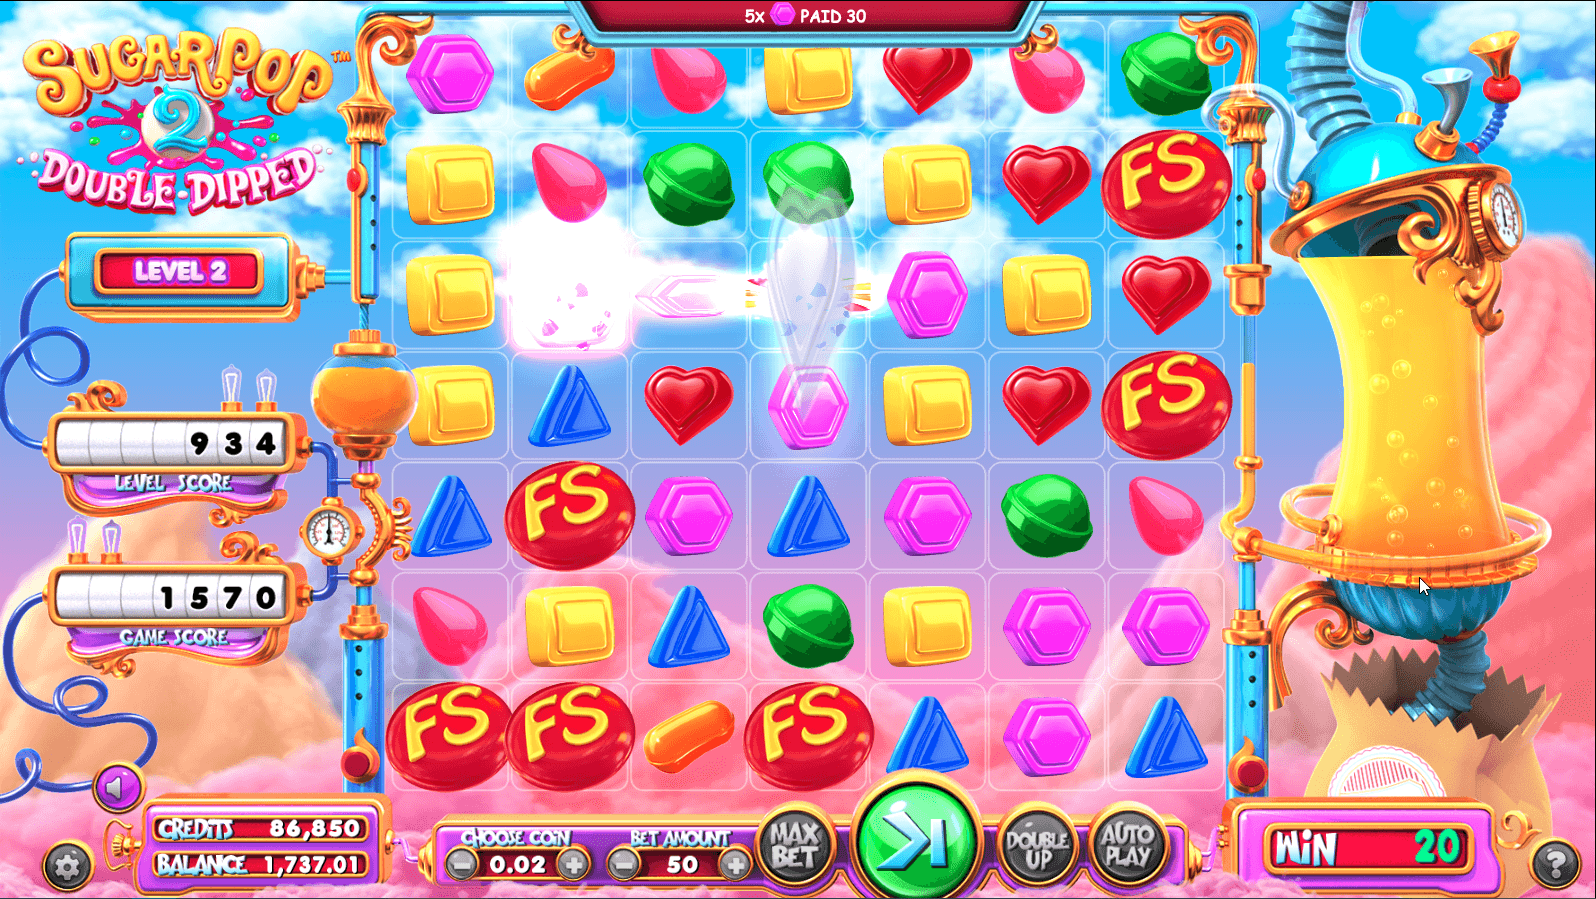 Betsoft SugarPop 2: Double Dipped